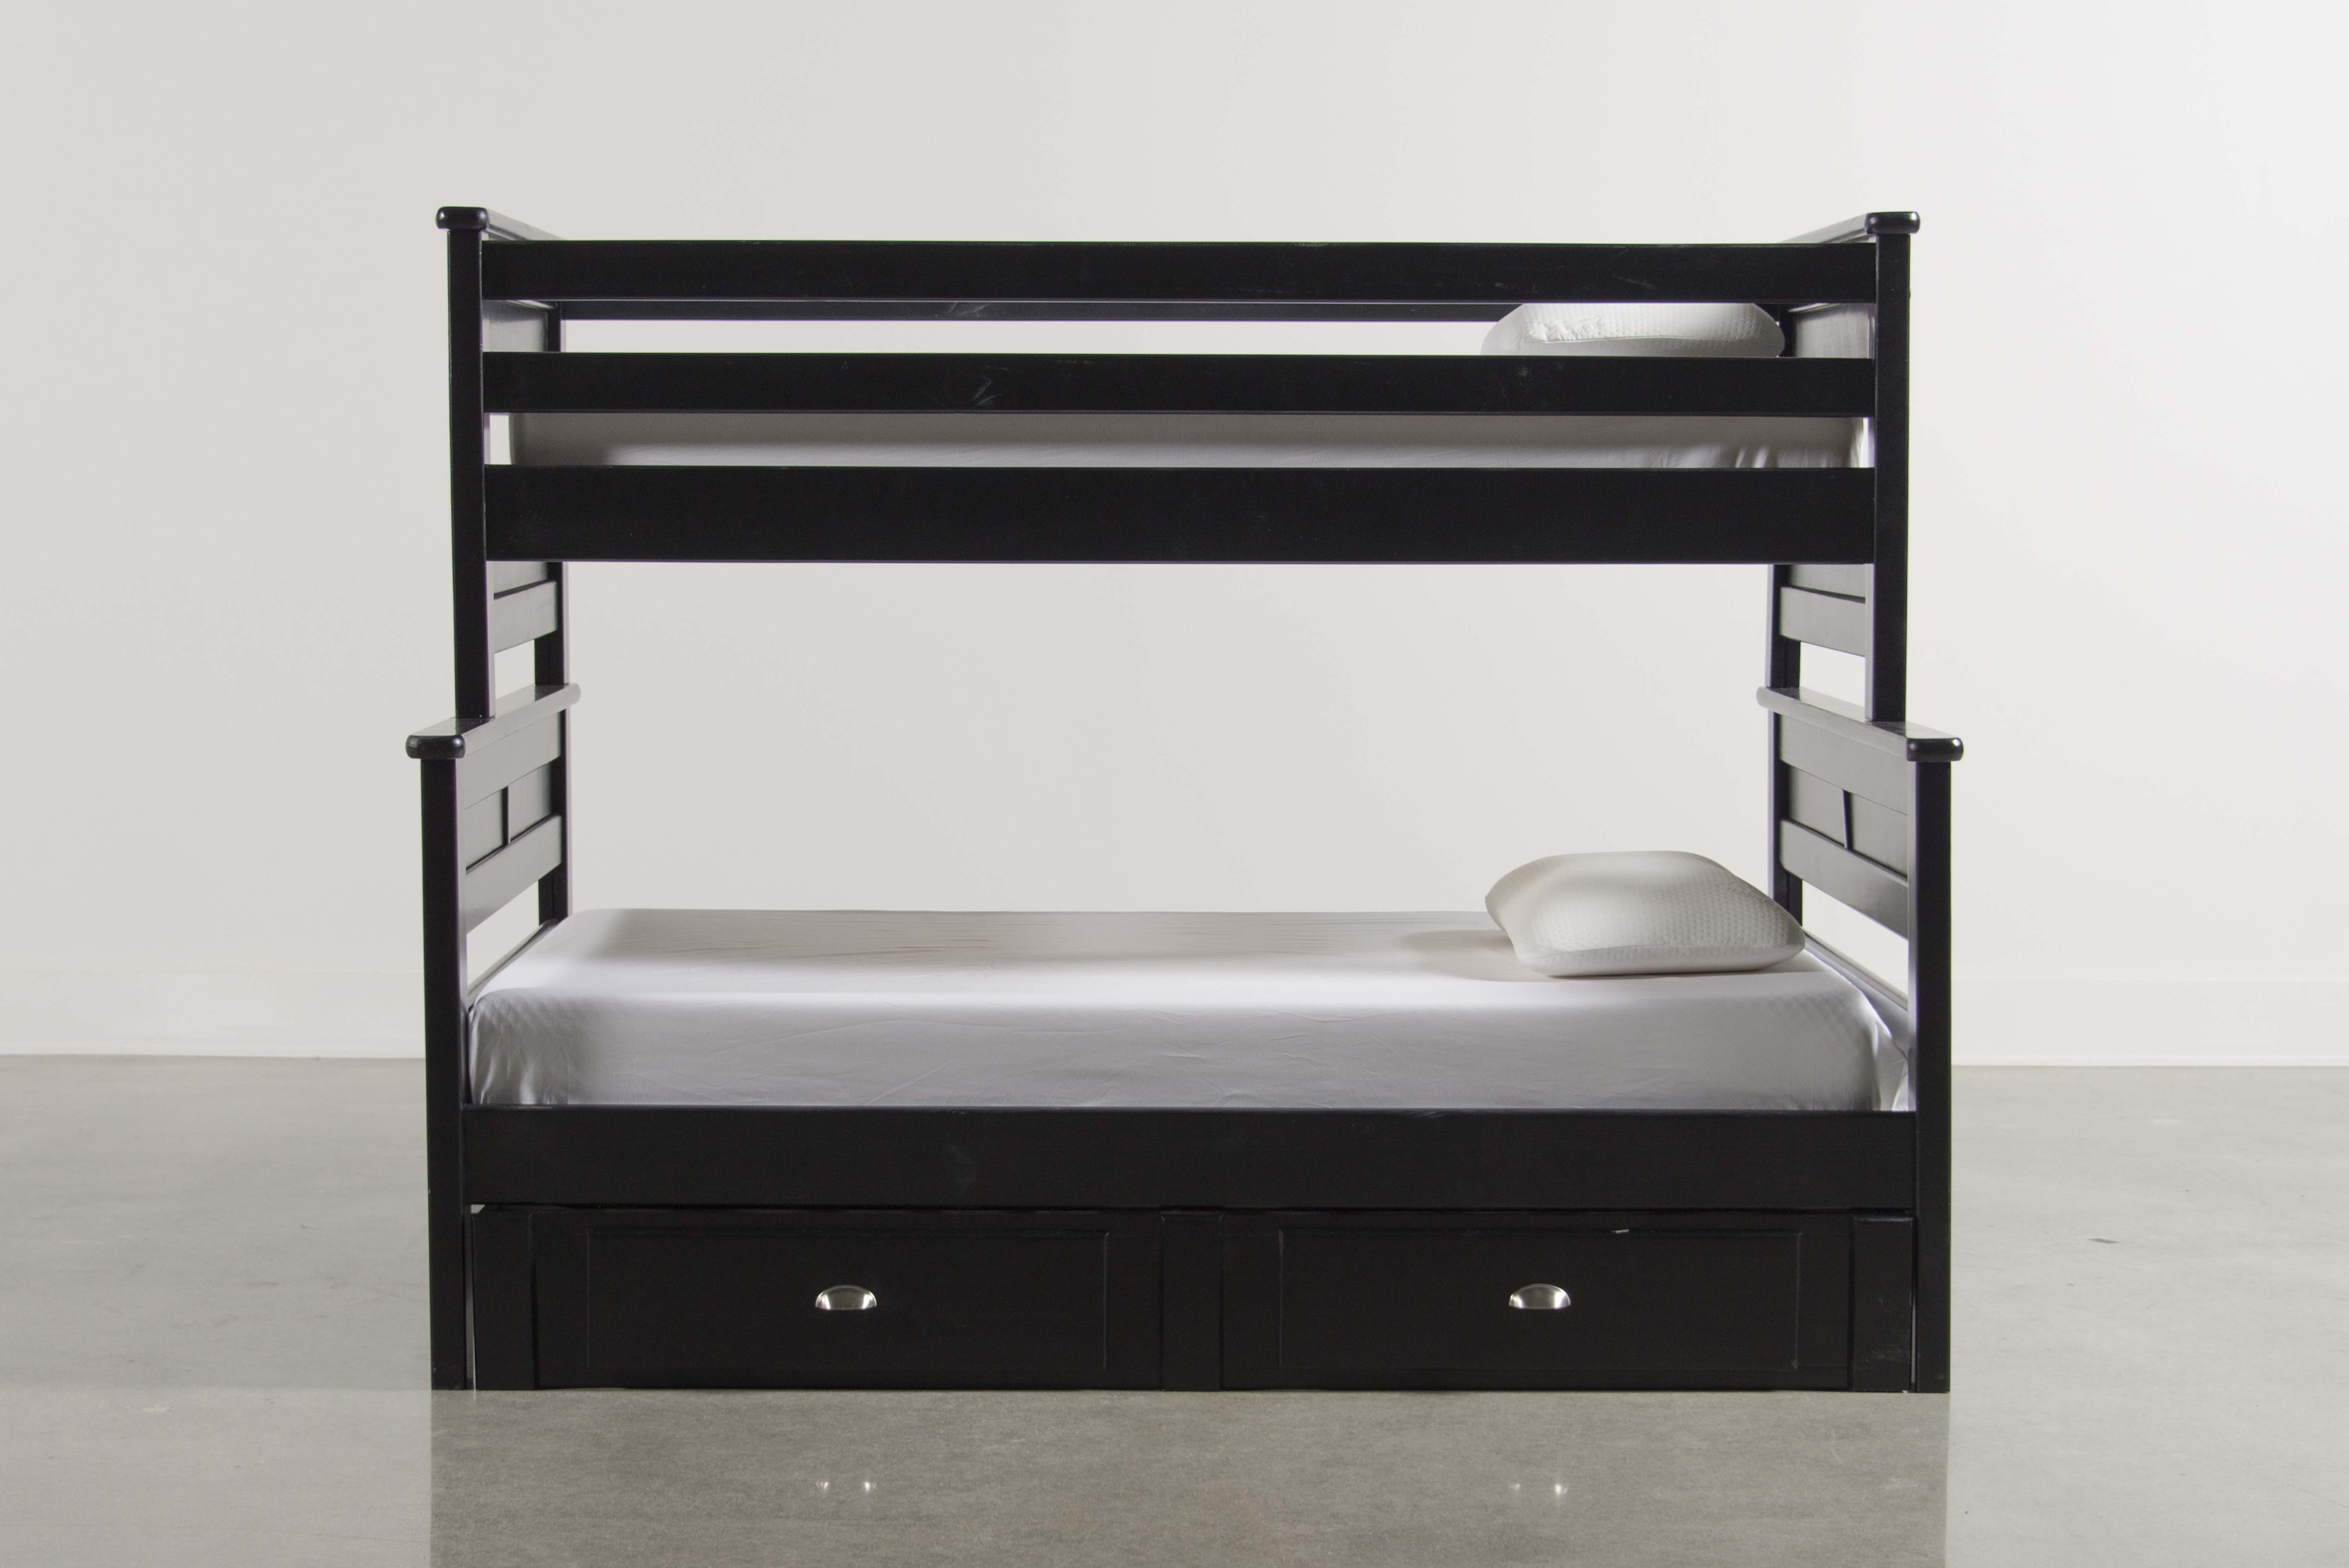 bunk beds with full on bottom and trundle